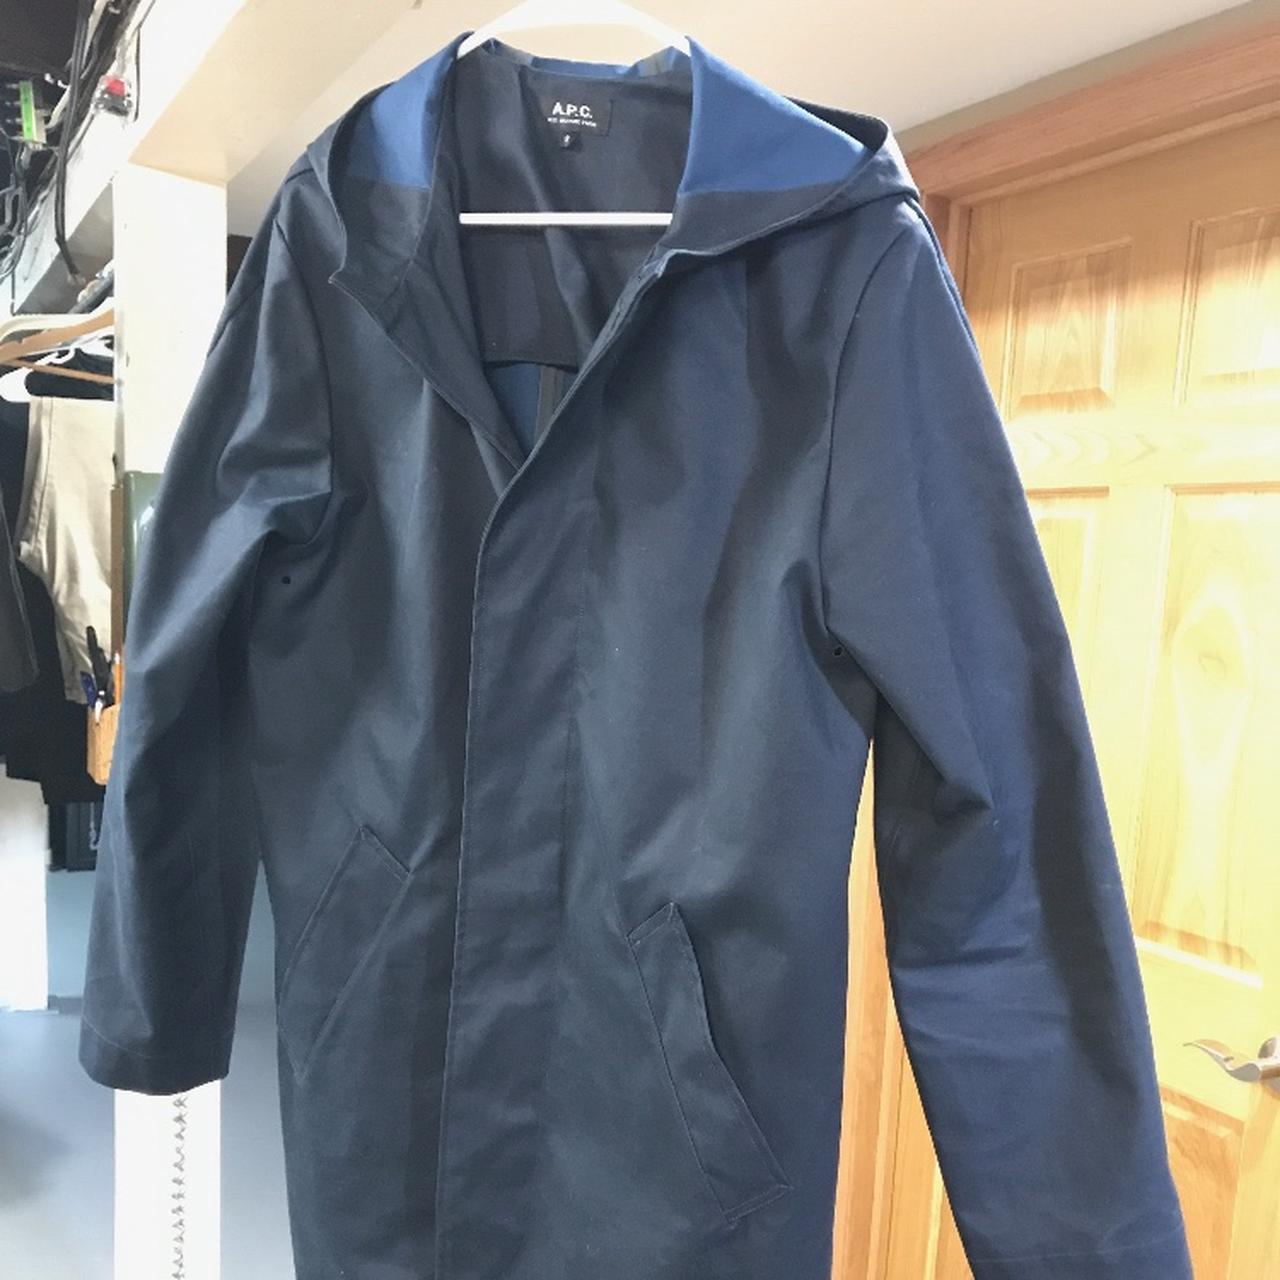 Navy colored APC raincoat. Size S in mens. Worn once.